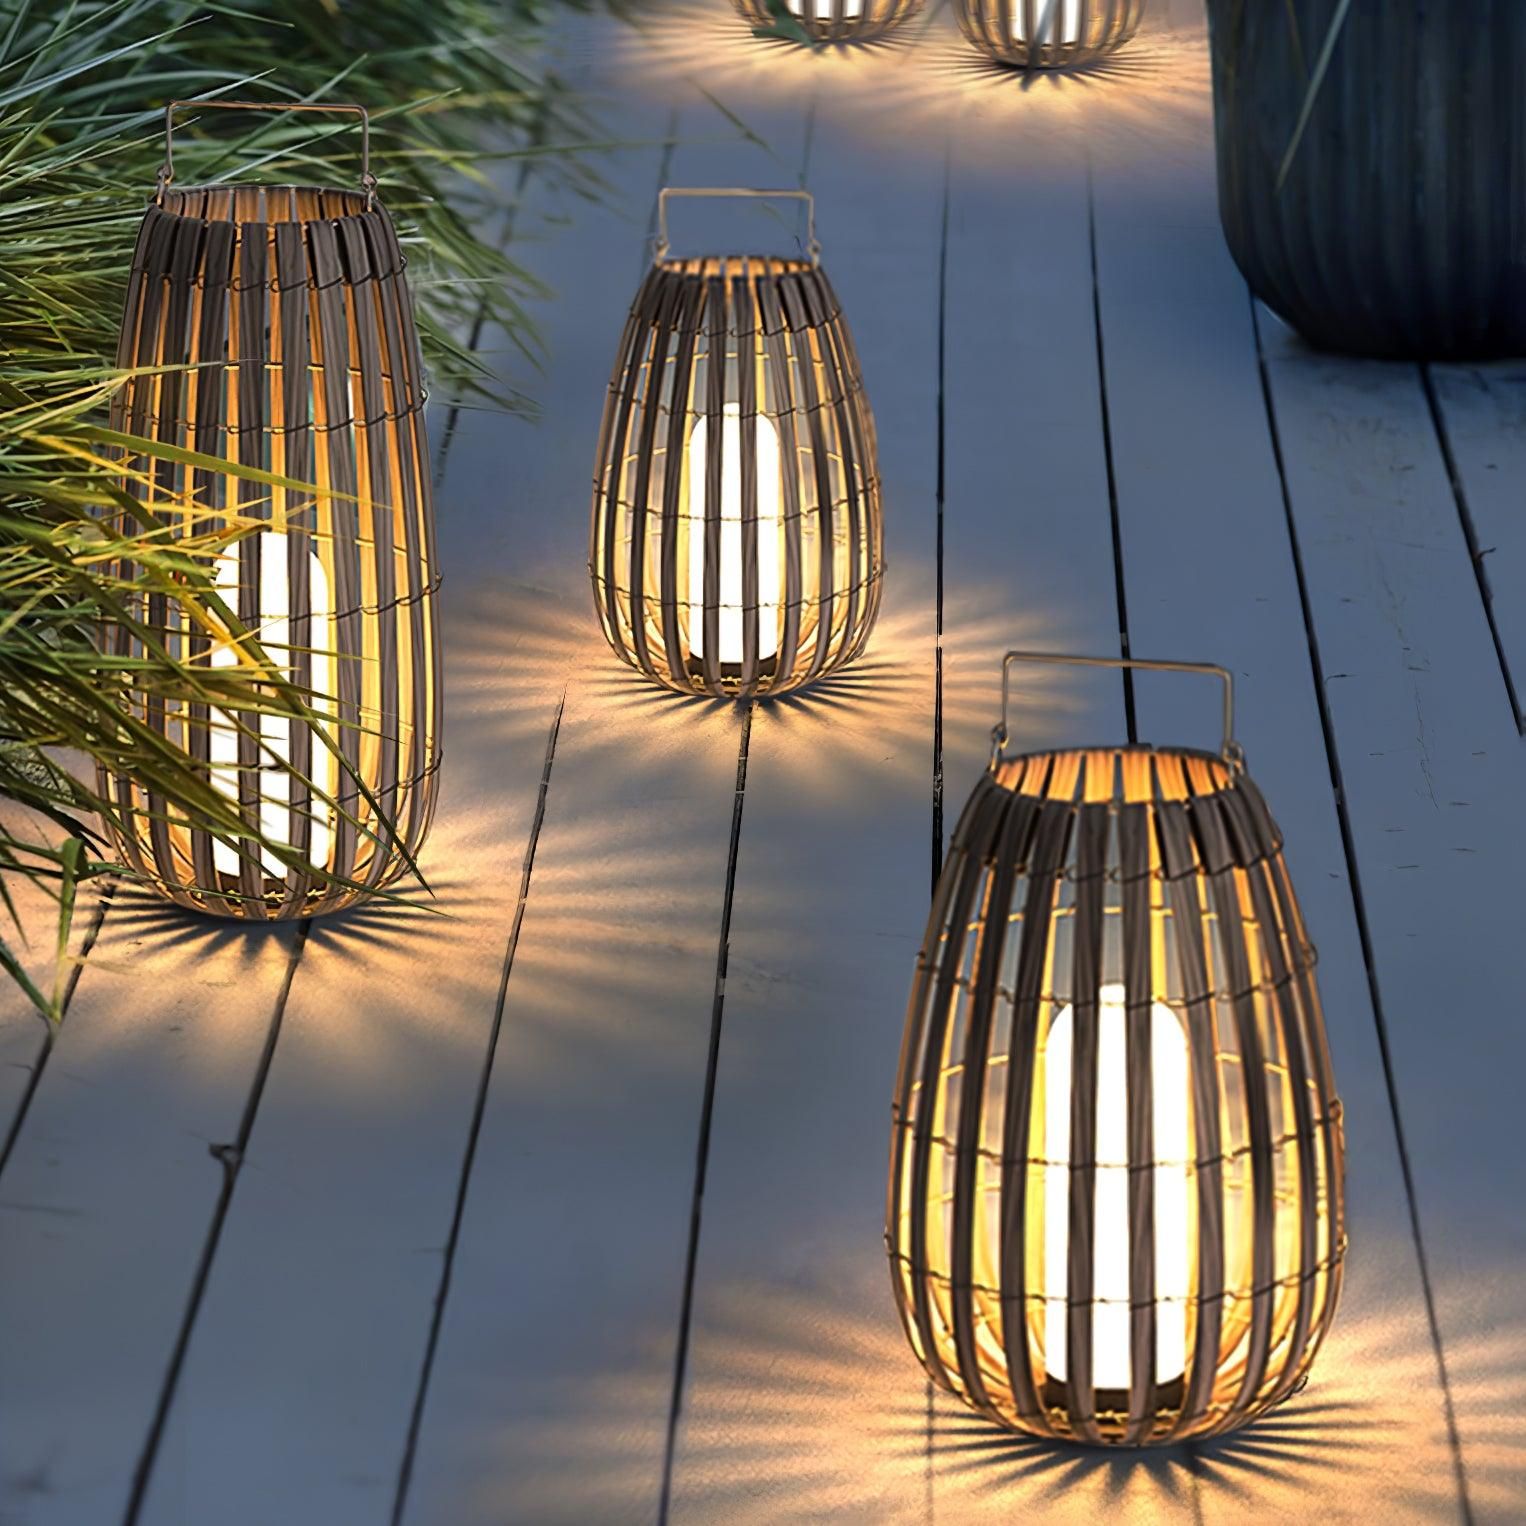 Outdoor Weather Resistant Lanterns – Your Perfect Outdoor Lighting Solution